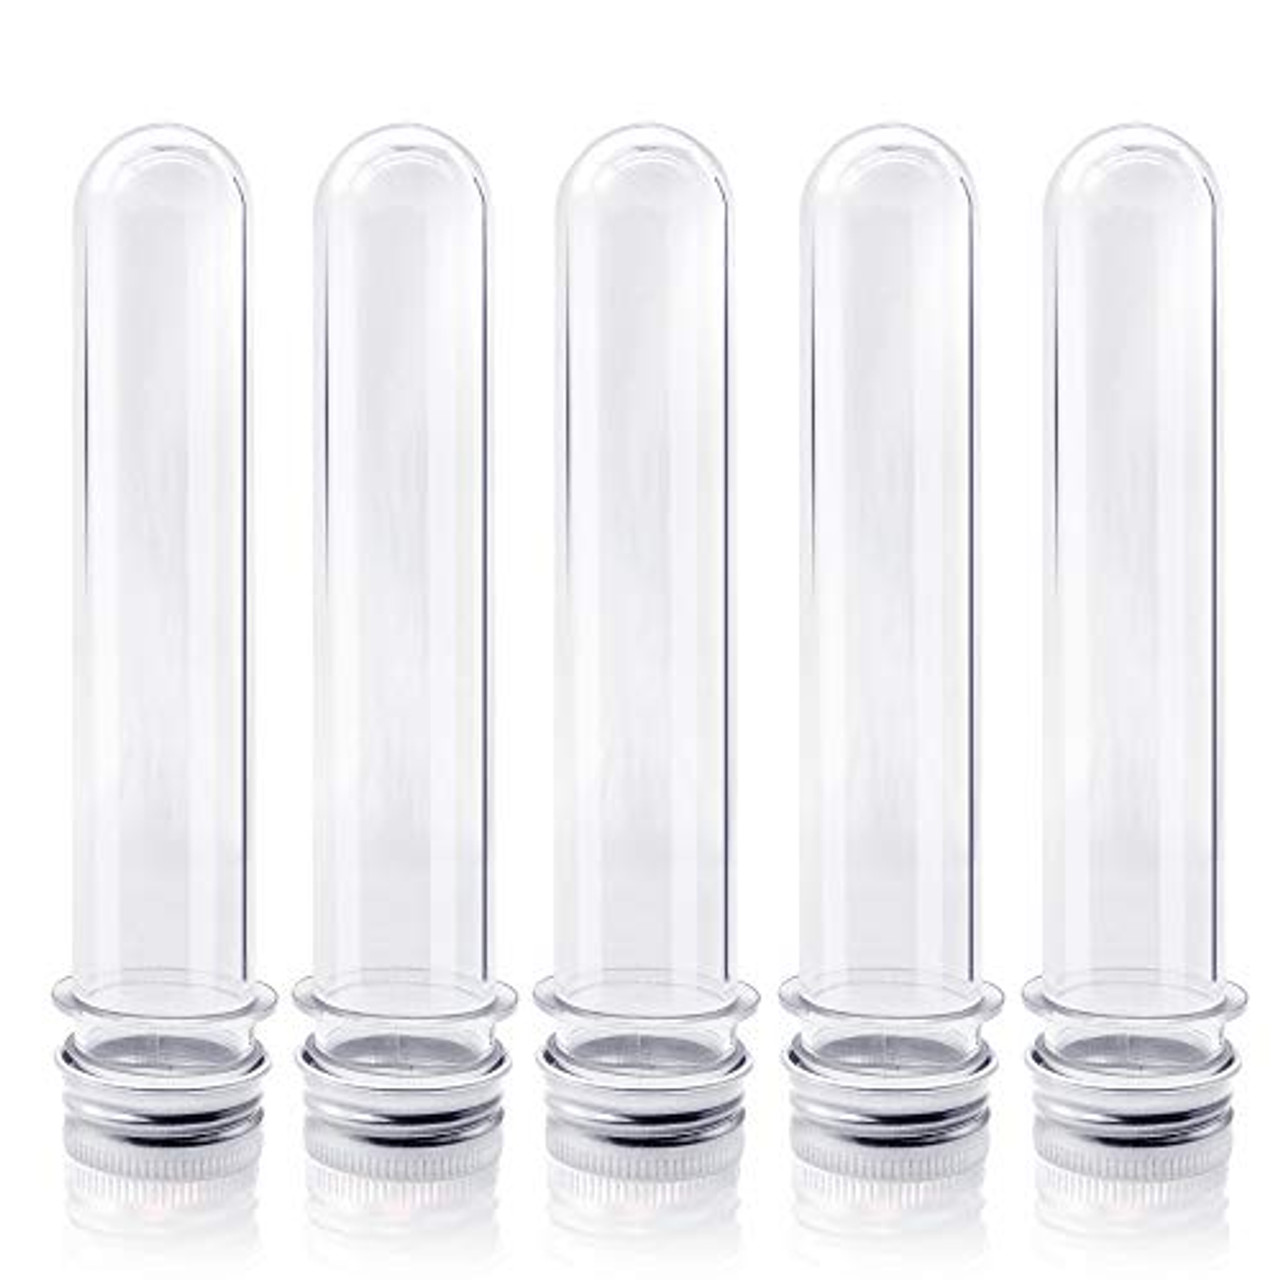 12PCS 40ML Multi-Purpose Round Clear Plastic Test Tube With Aluminum Screw Cap Bath Salt Container Scientific Experiments Party Decorate The House Candy Storage Holder 